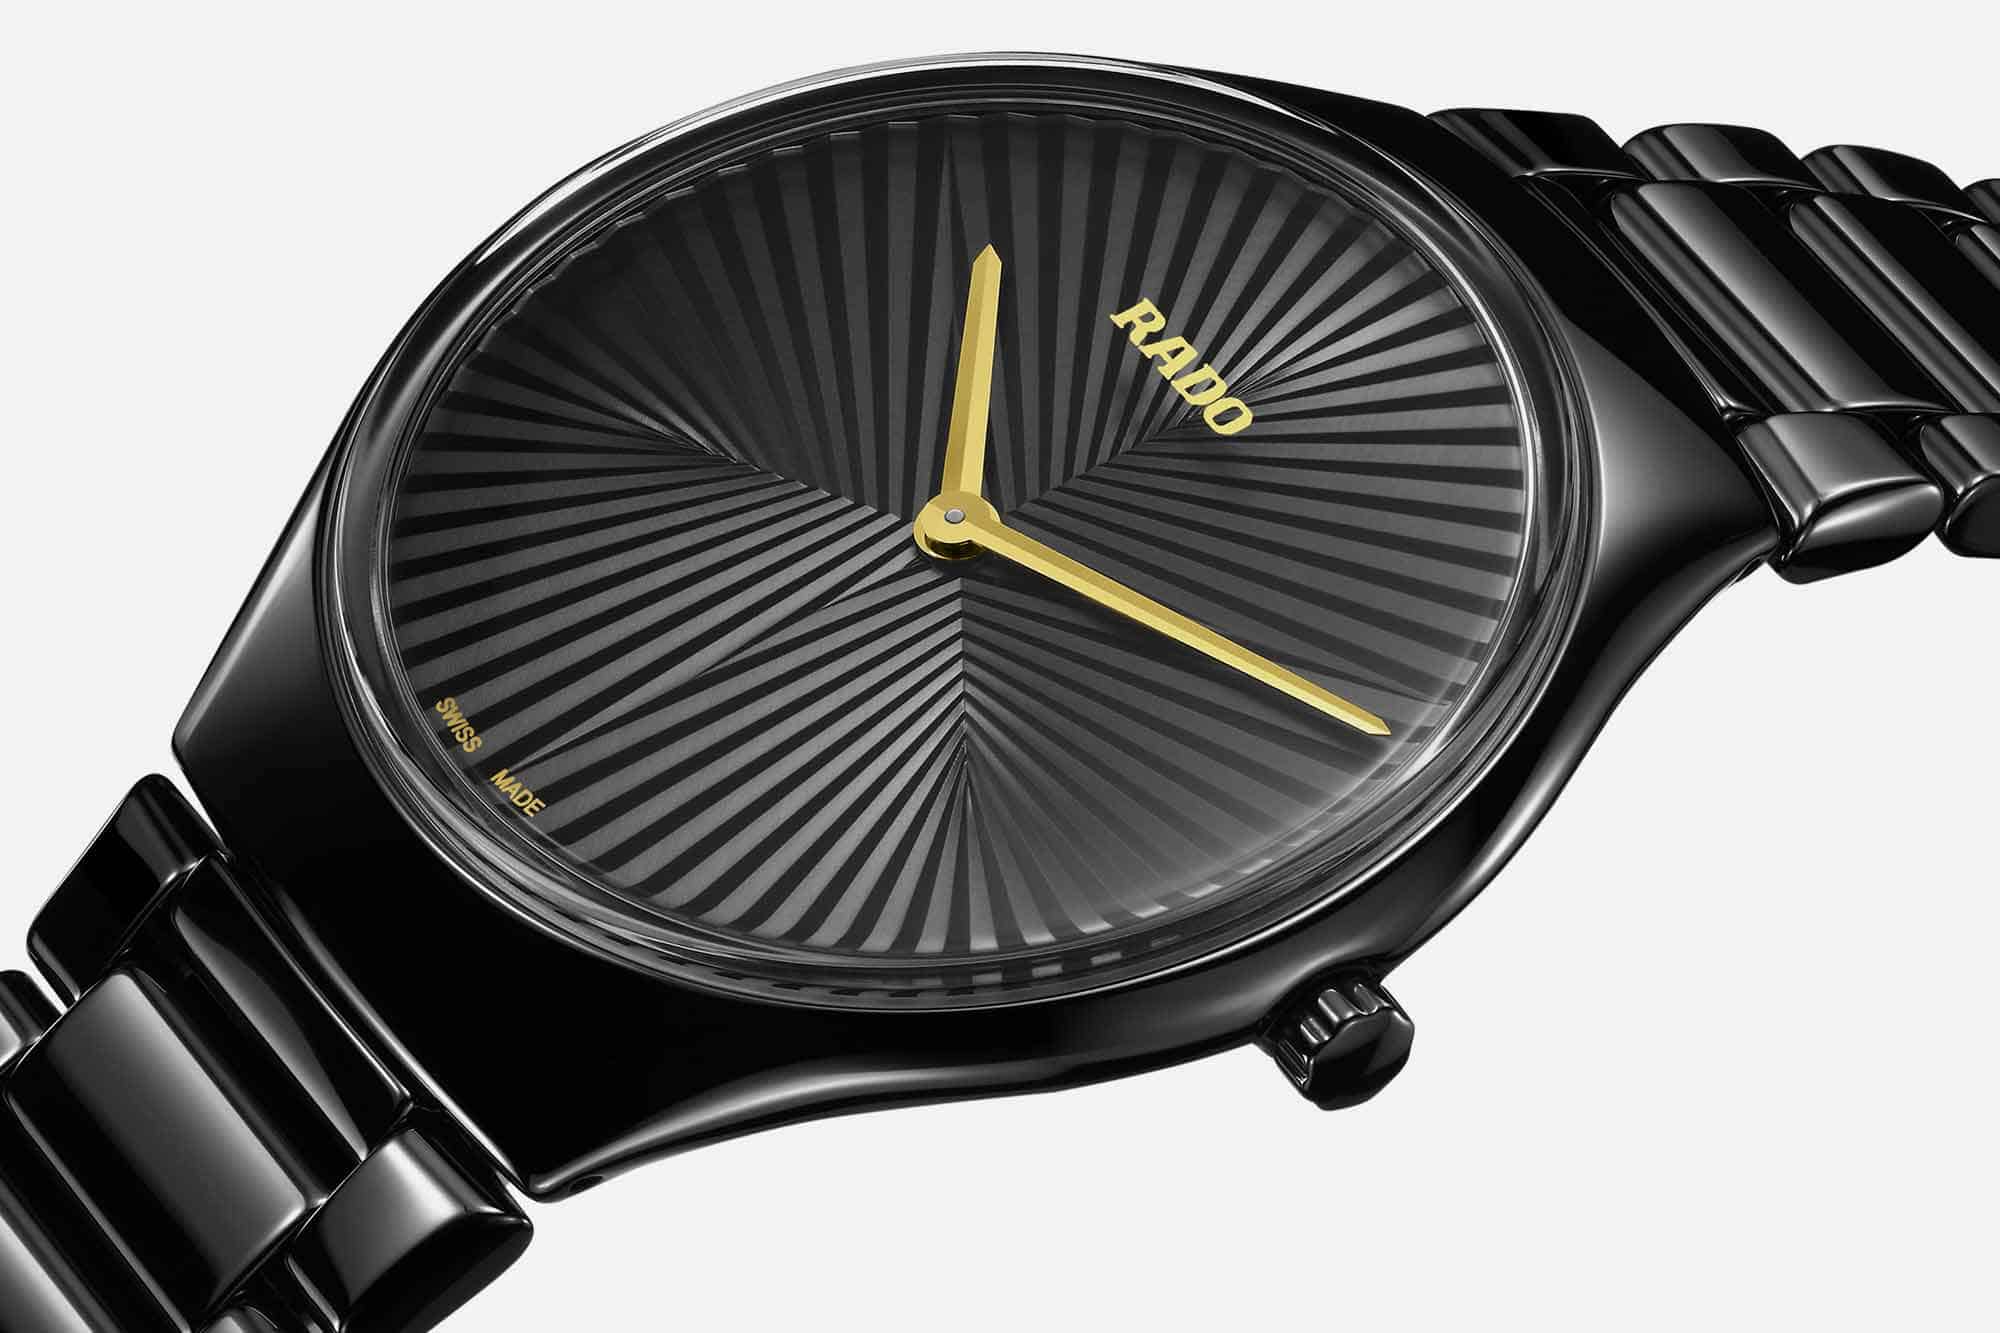 Rado Adds Three New Ceramic Watches to their Great Gardens of the World Series